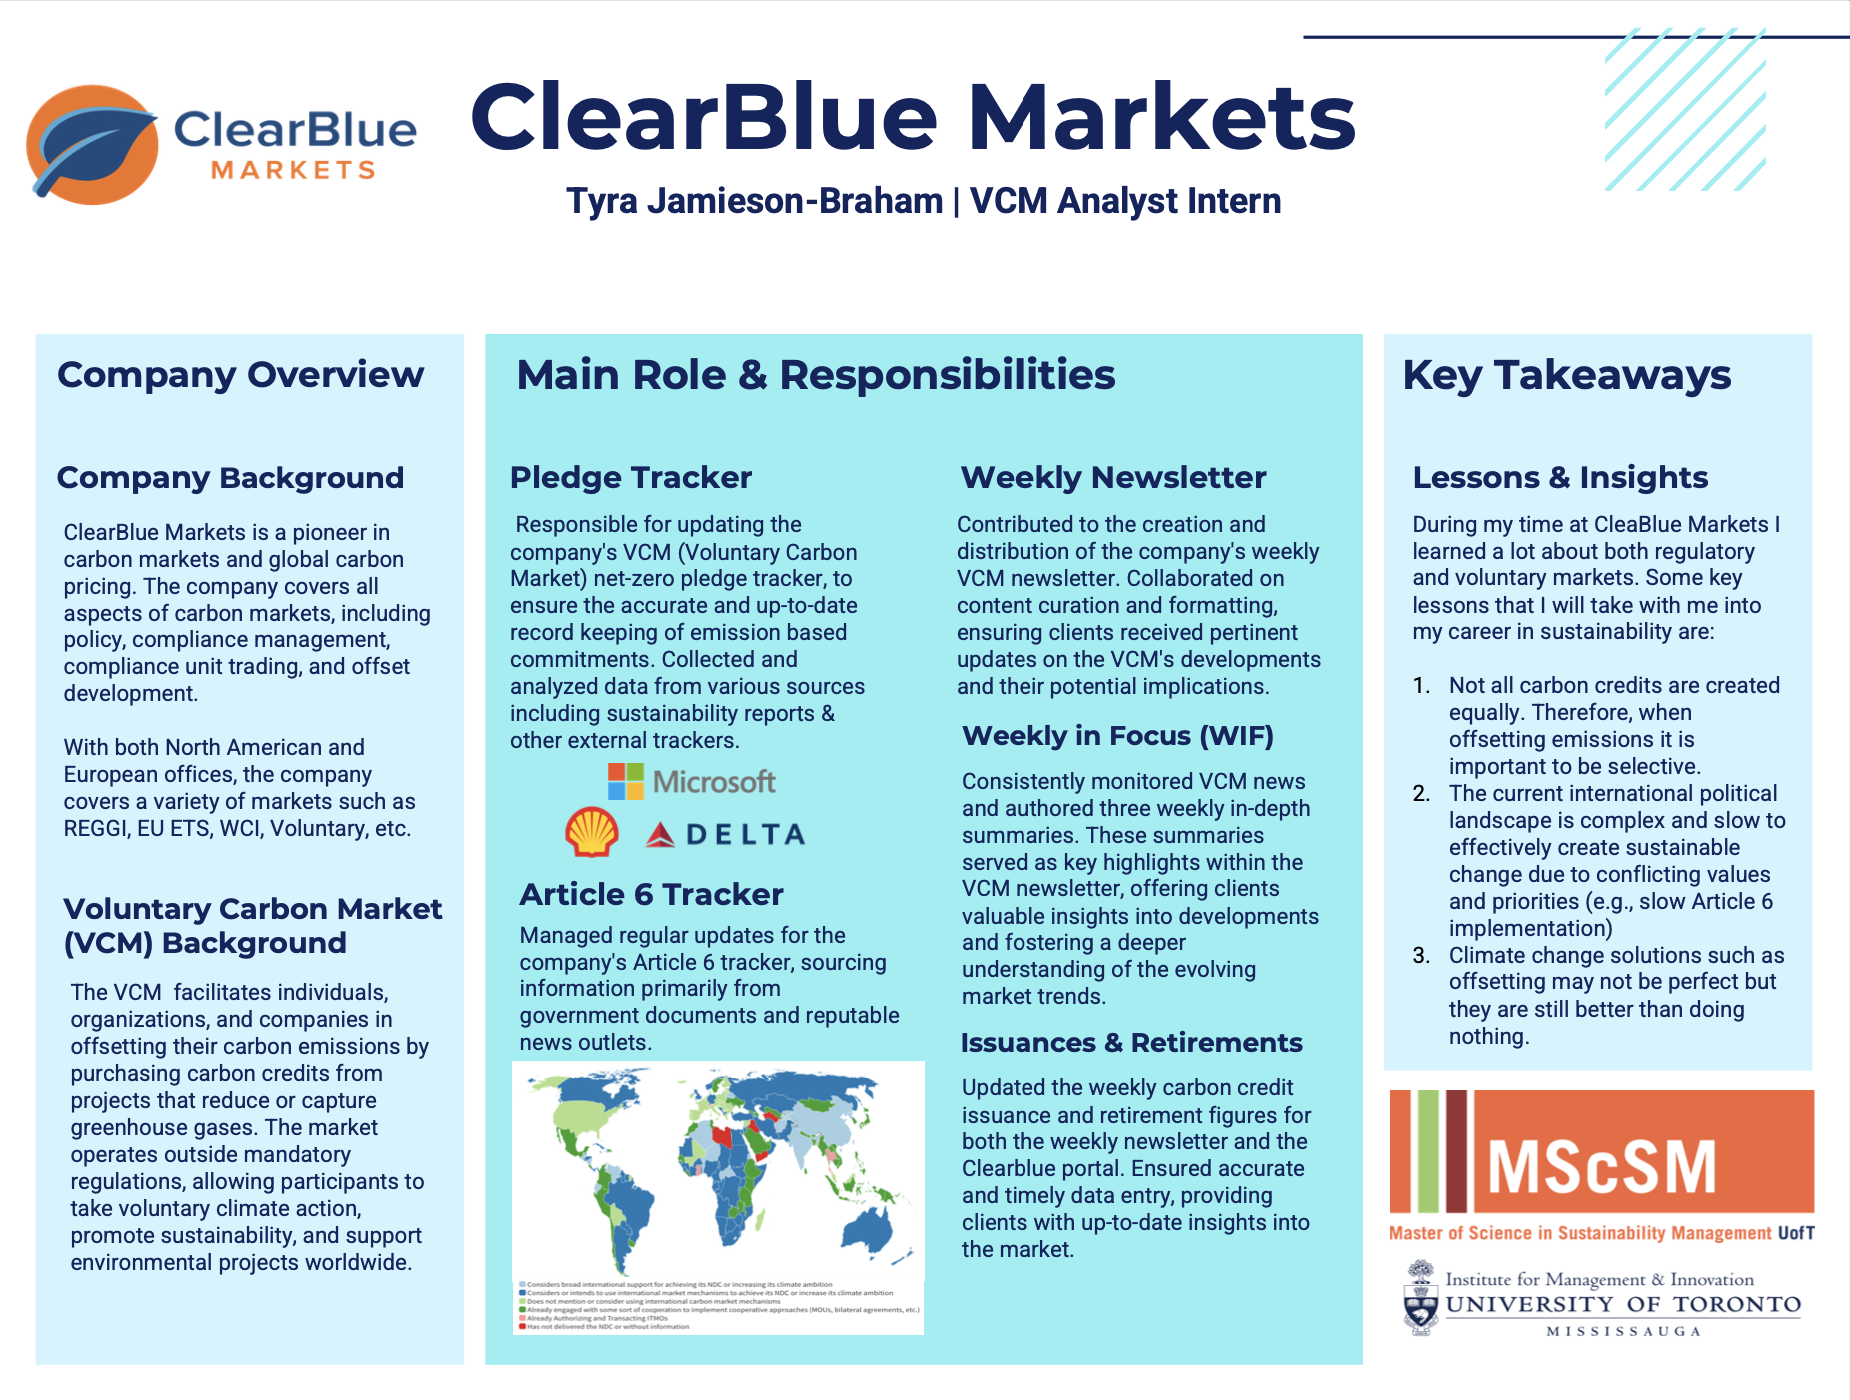 Showcase Image for ClearBlue Markets VCM Analyst Intern